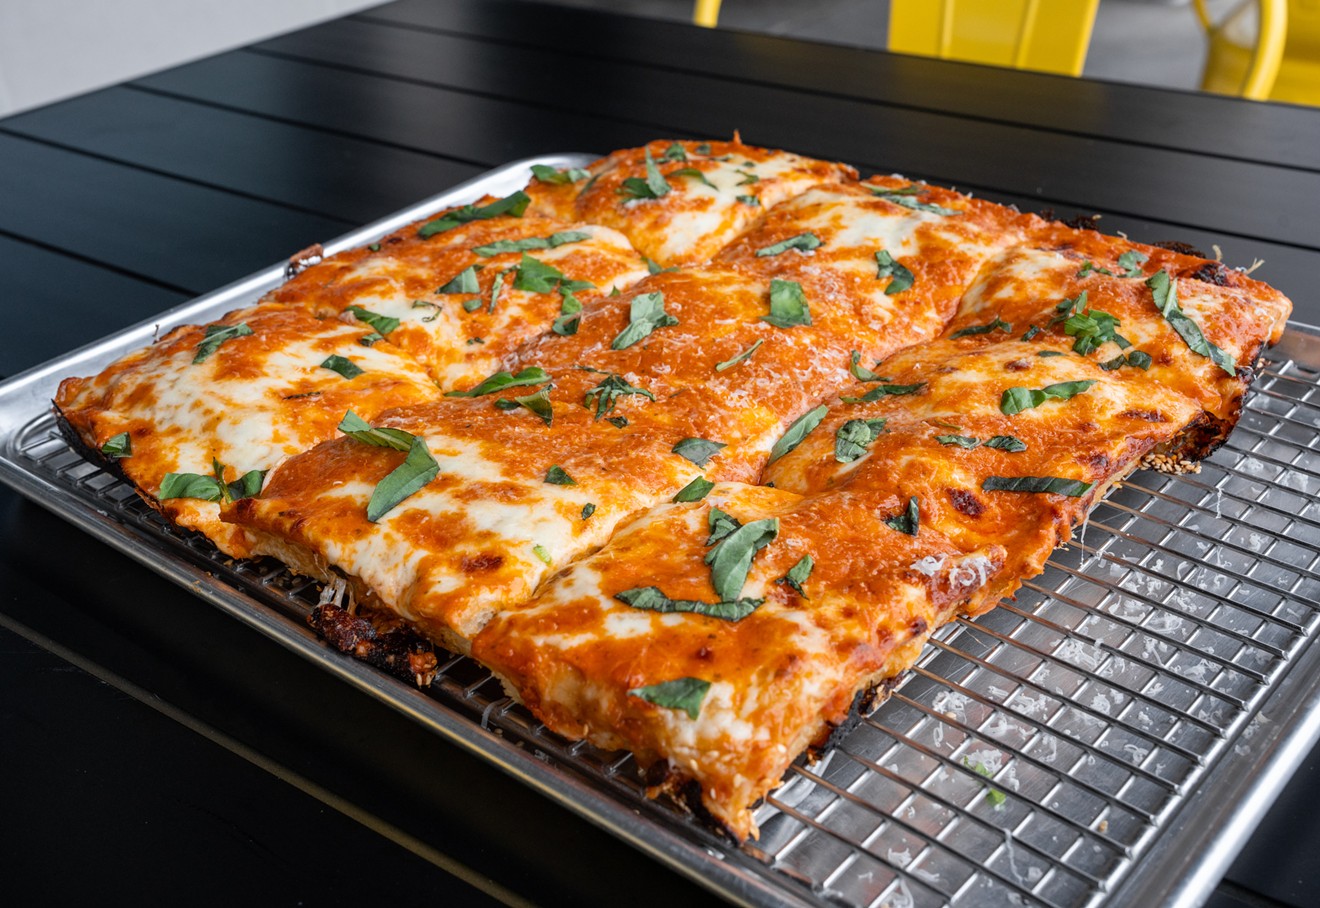 All three of PILF Restaurant Group's pizza restaurants are getting a revamp this year.